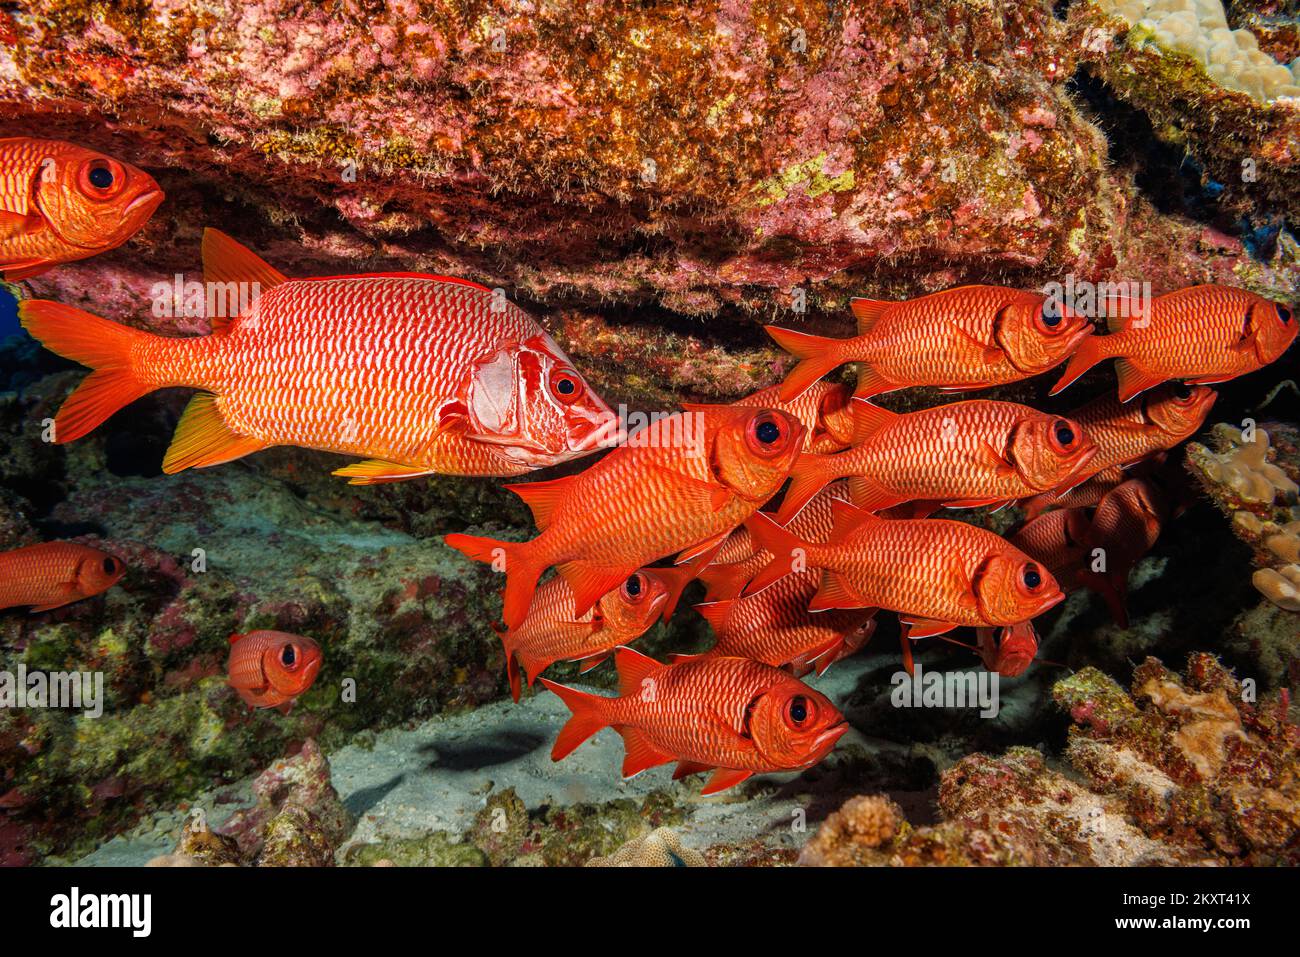 This longjaw squirrelfish, Sargocentron spiniferum, is the largest species of this family and appears quite at home in this school of bigscale soldier Stock Photo